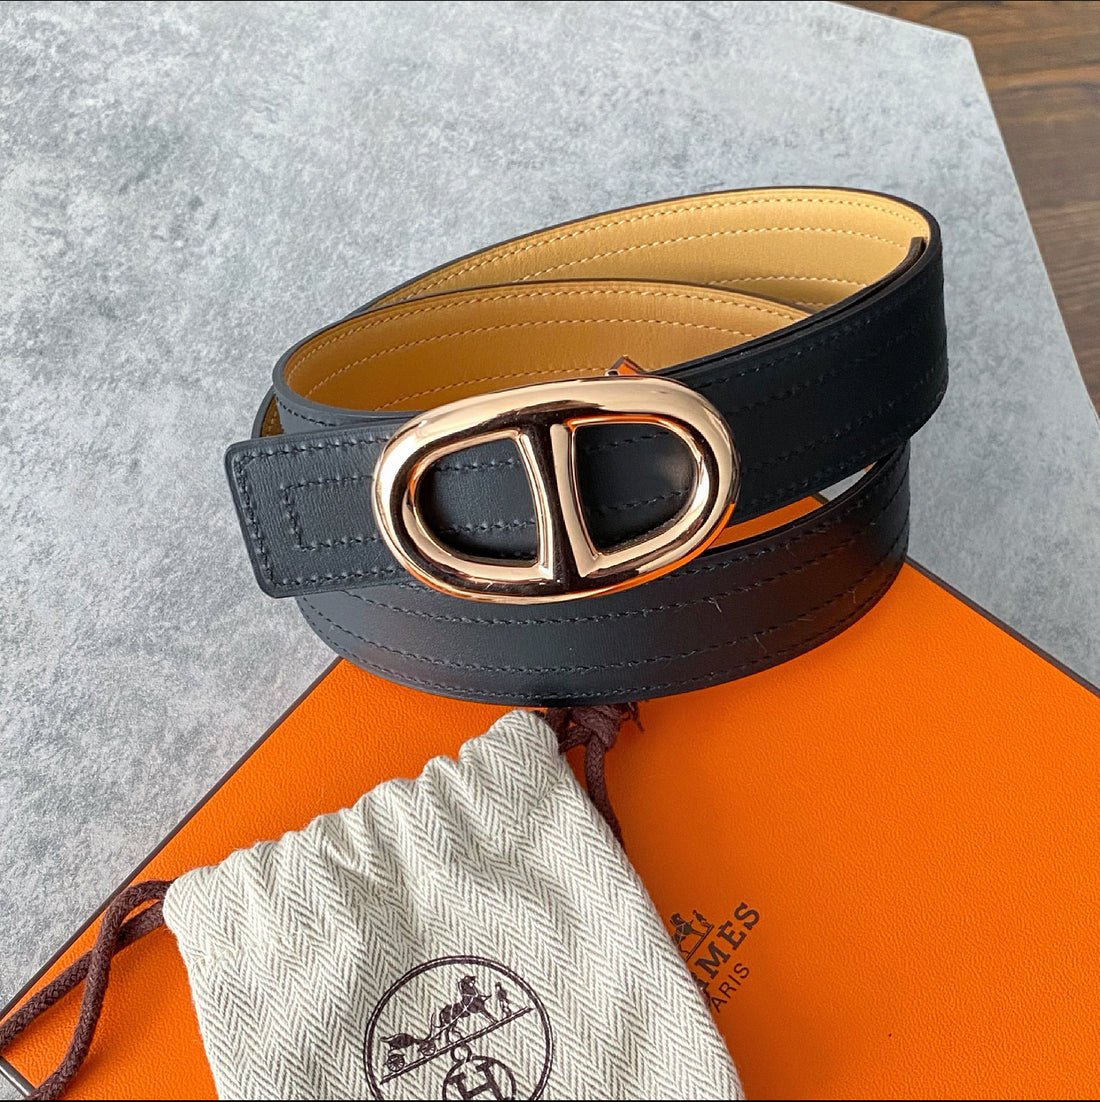 Hermes Chaine D'ancre Rose Gold Pialle Yellow and Black Belt Kit - 85